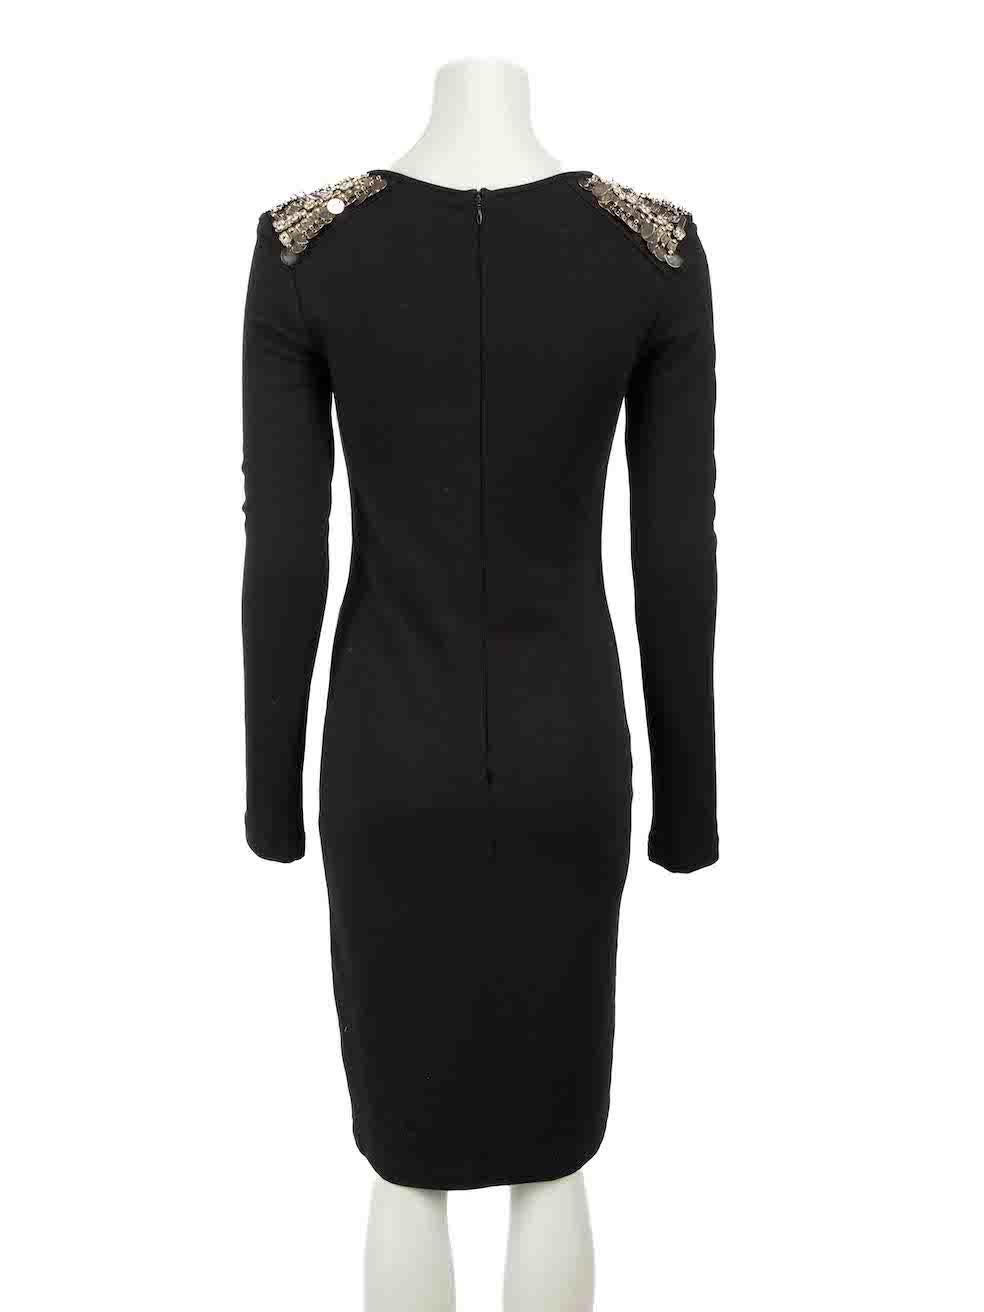 Alexander McQueen McQ 2013 Black Embellished Bodycon Dress Size M In Good Condition For Sale In London, GB